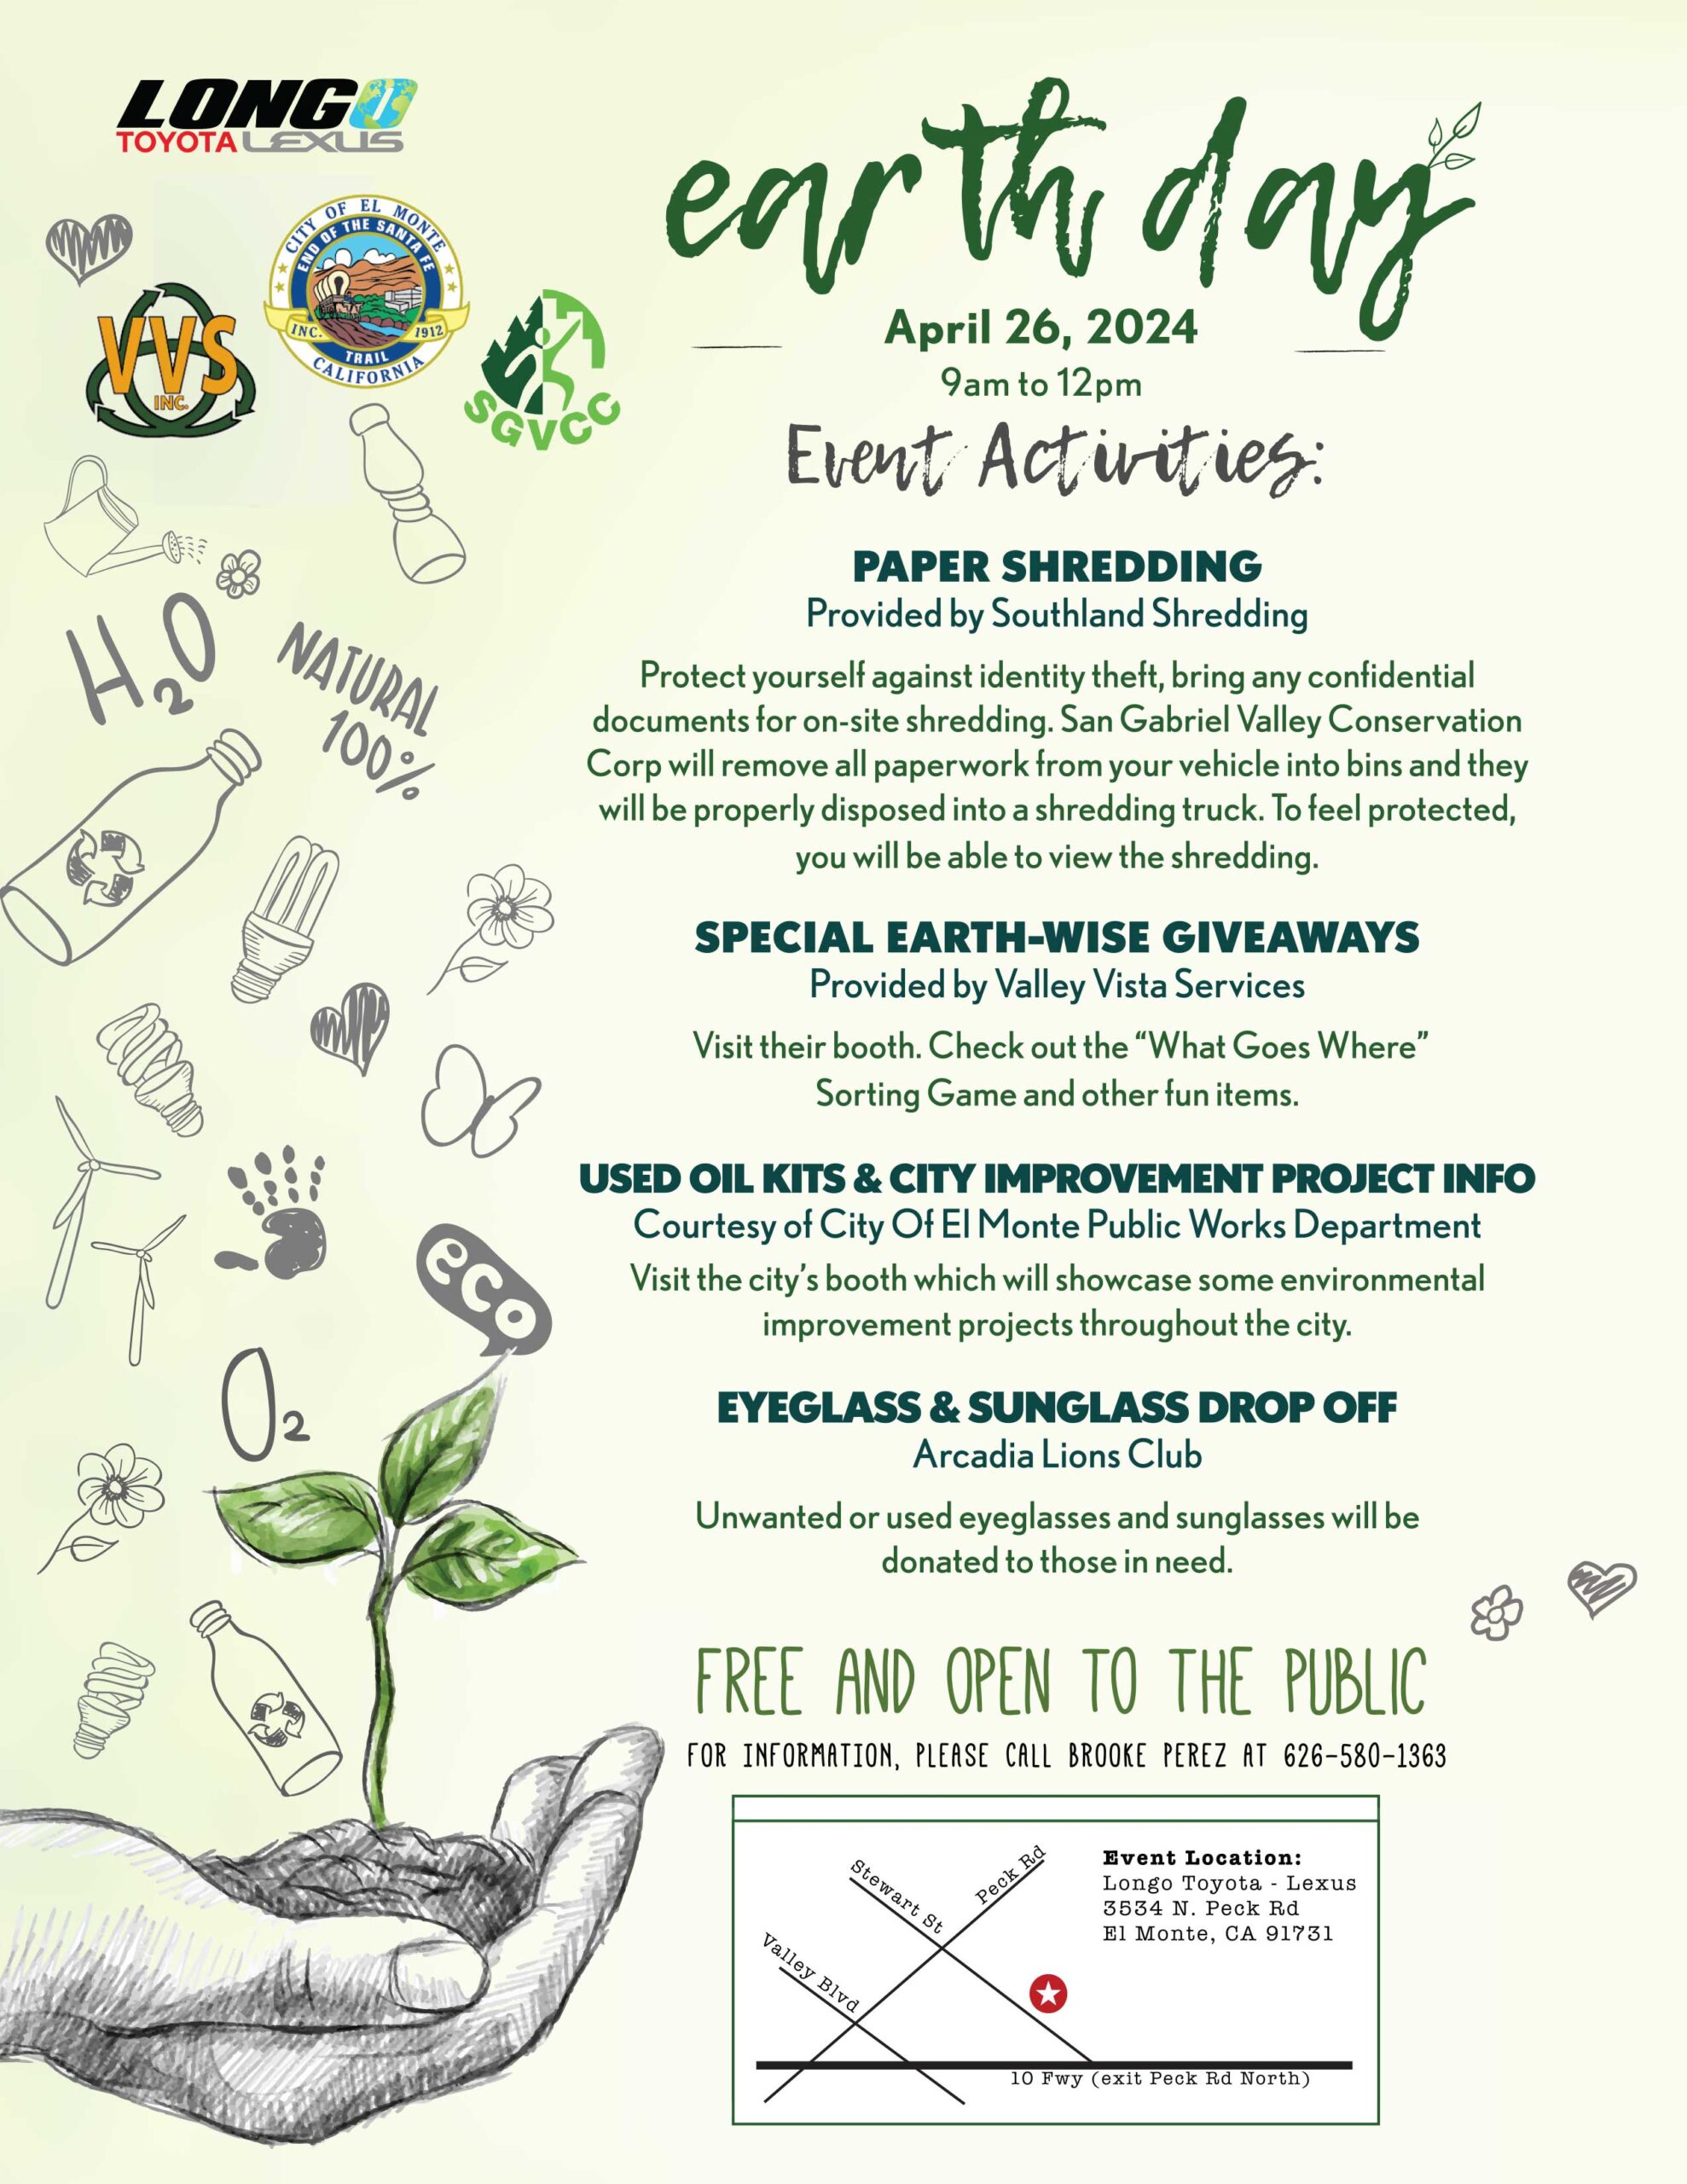 Earth Day events and activities at Longo Toyota